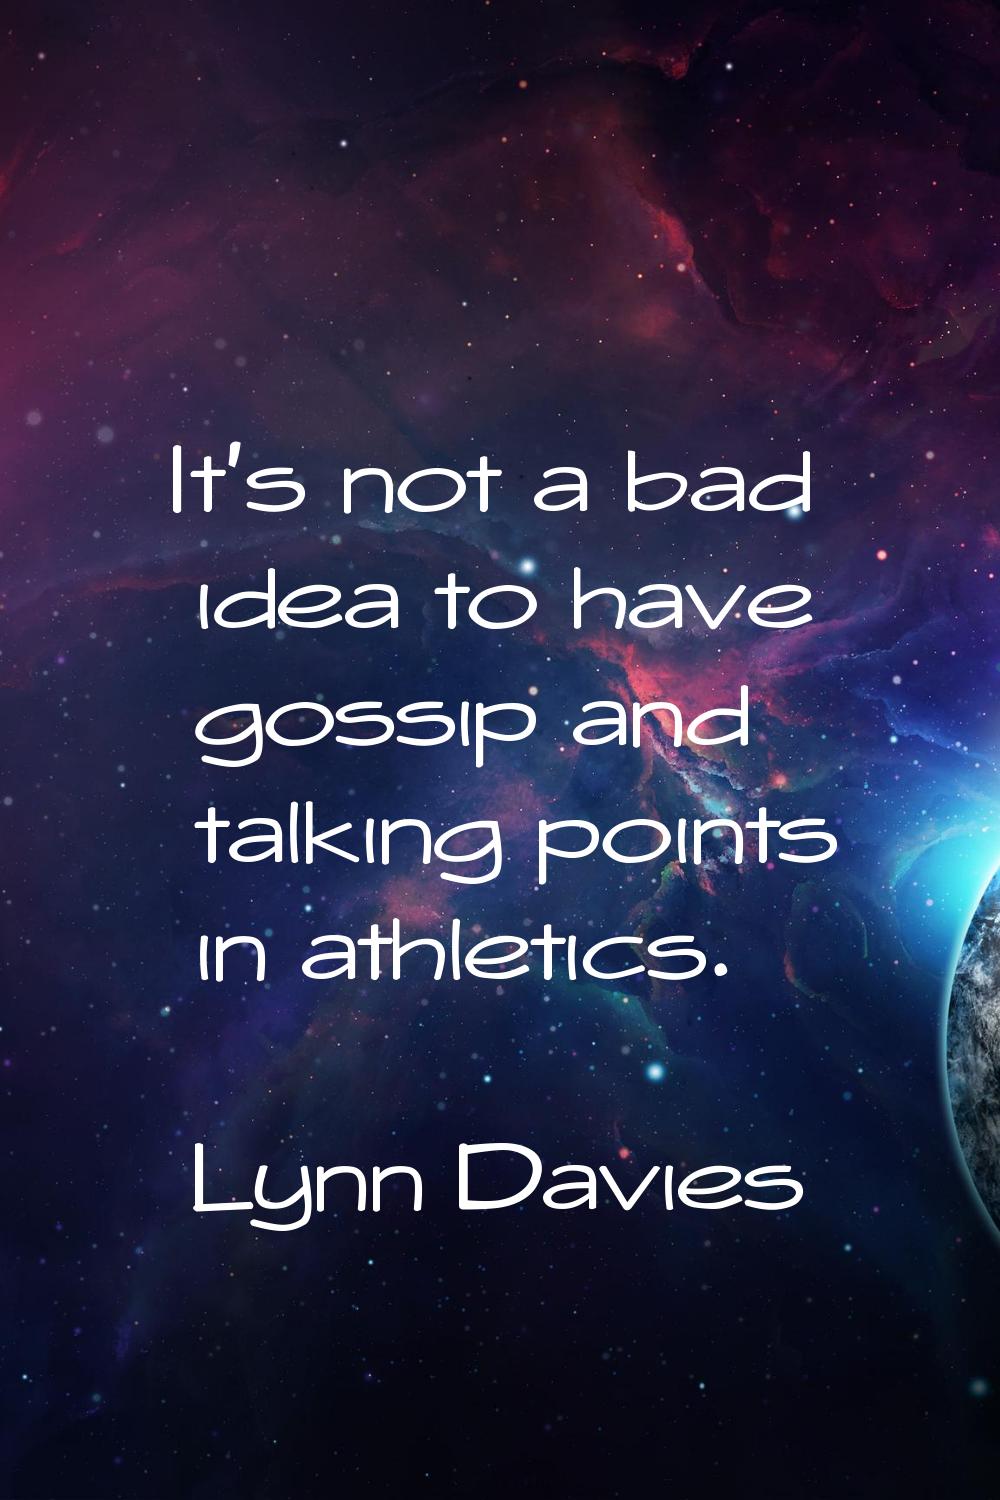 It's not a bad idea to have gossip and talking points in athletics.